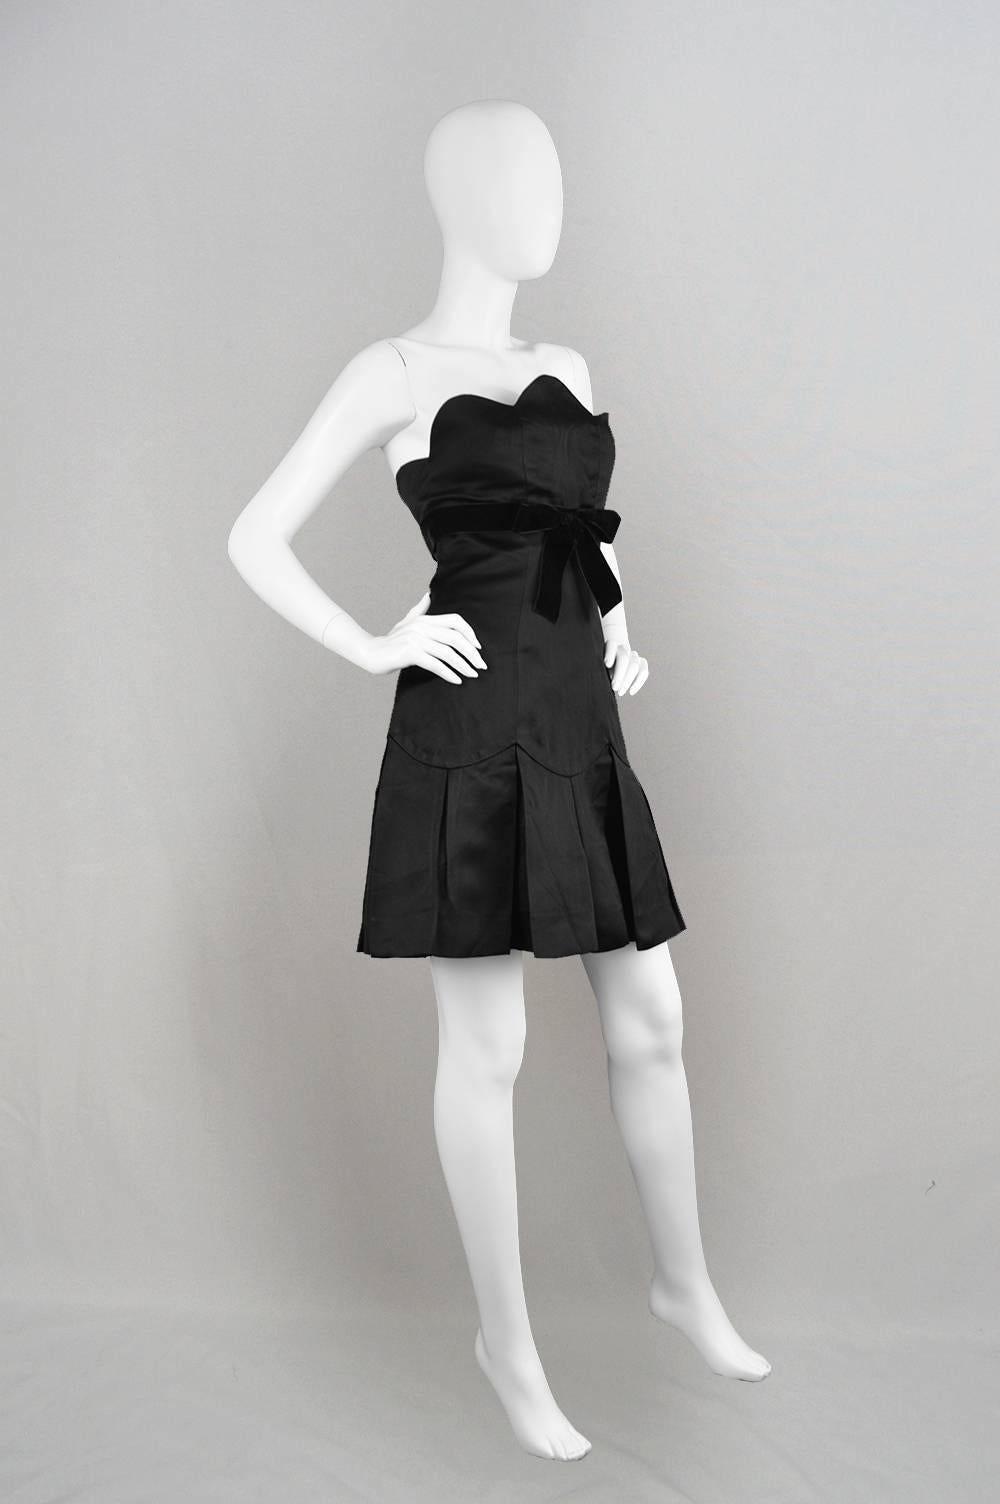 A chic and sophisticated vintage Chanel boutique party dress with lots of sex appeal. In a thick black silk with a scalloped bust that highlights the decolletage and a velvet bow that highlights the empire waist. The skirt is pleated and has a tulle